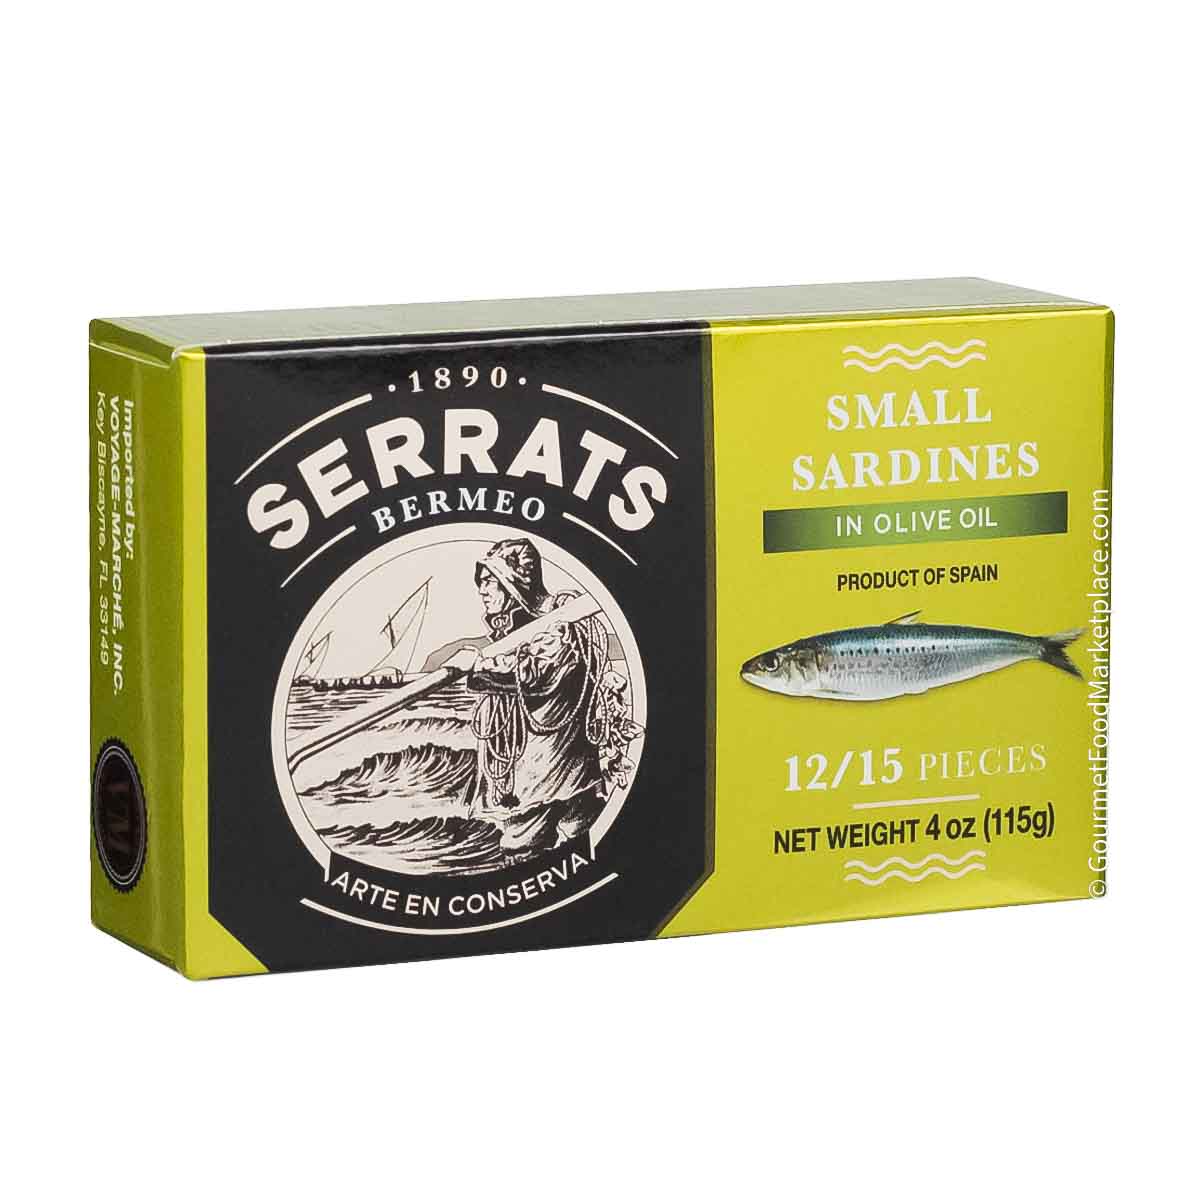 Wholesale Serrats Baby Sardines in Olive Oil